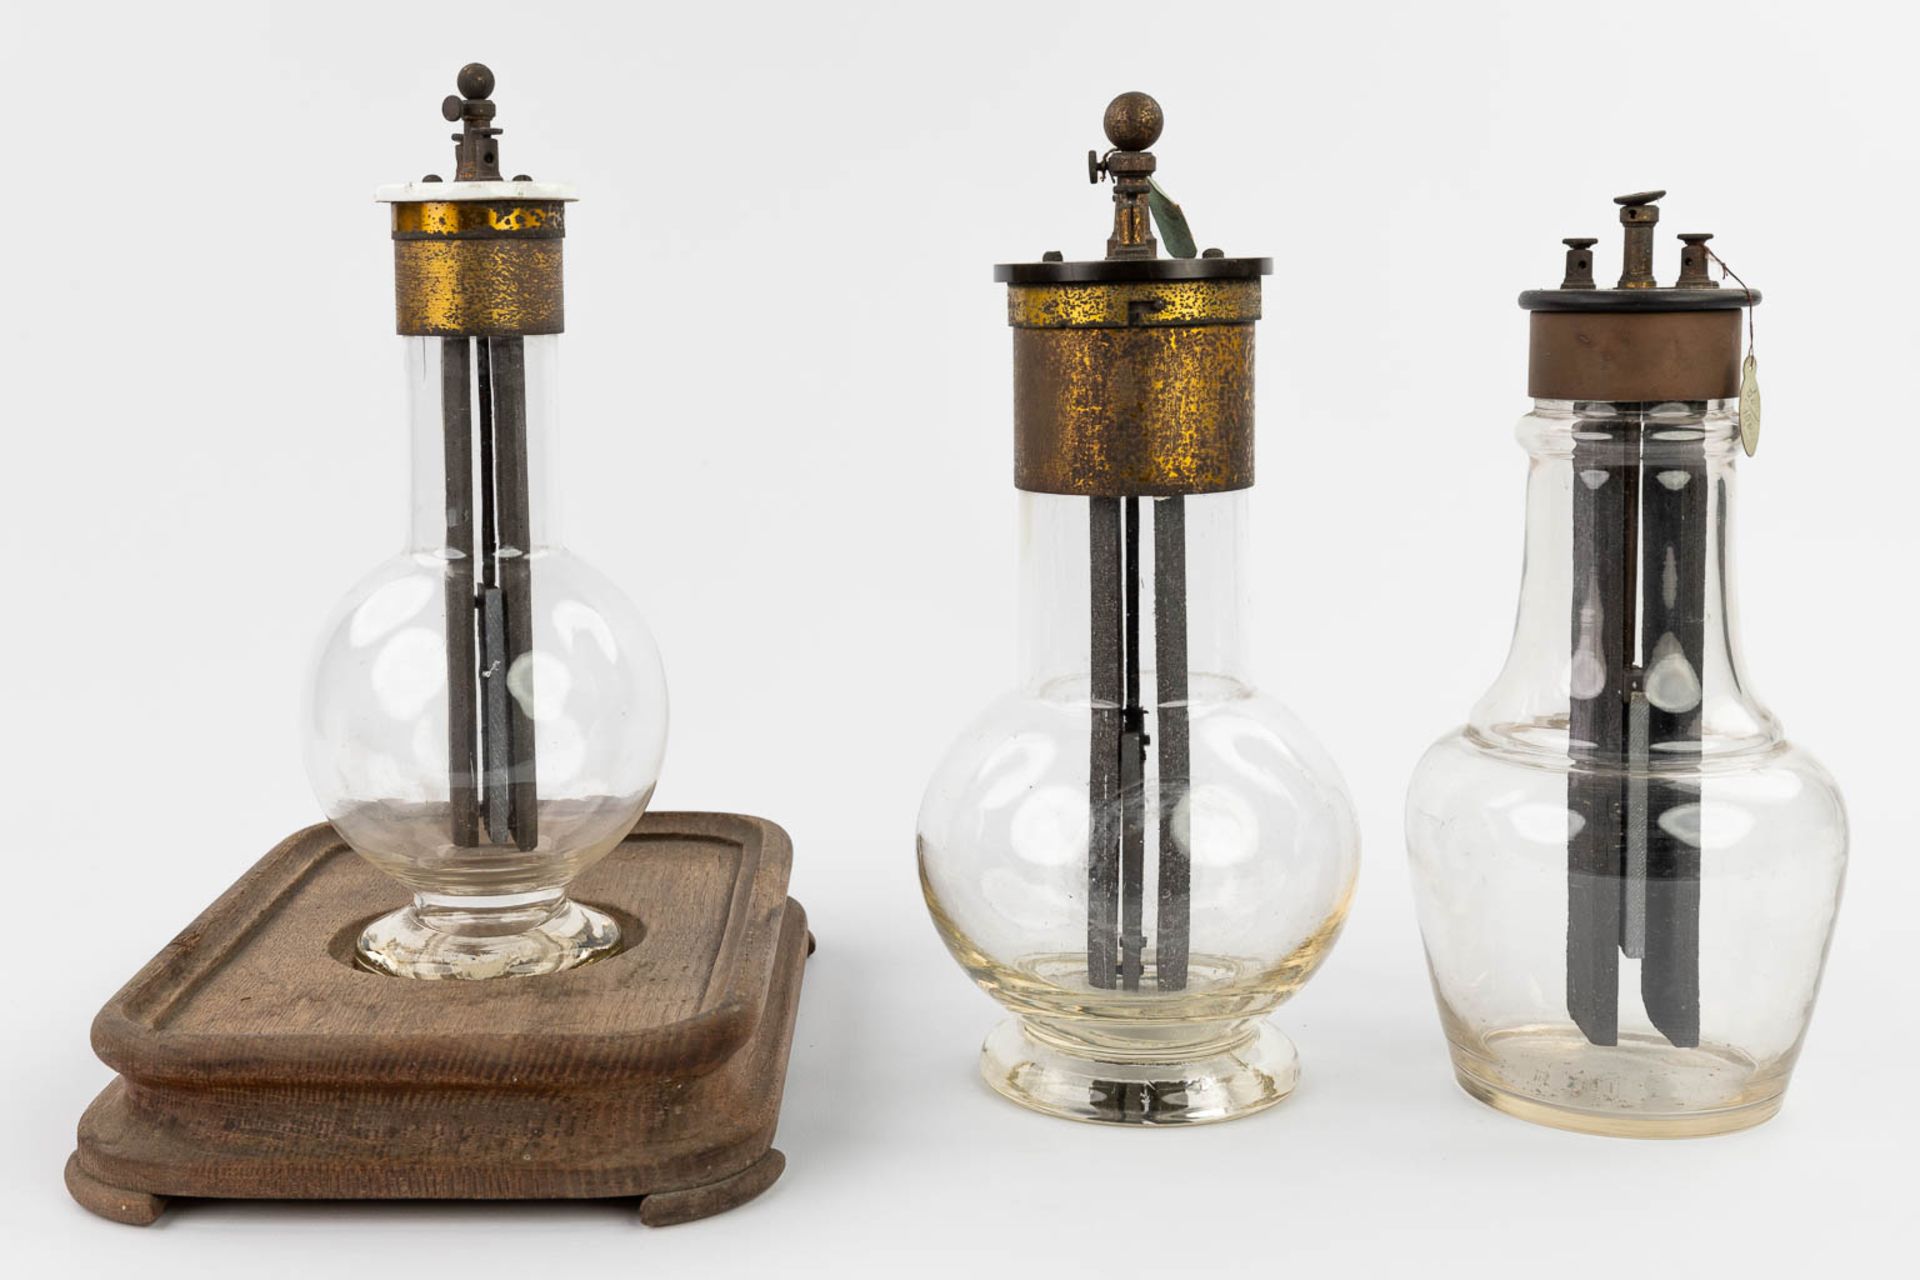 A collection of 3 'Grenet Cell' batteries made of glass. (H:30 x D:14 cm) - Image 14 of 14